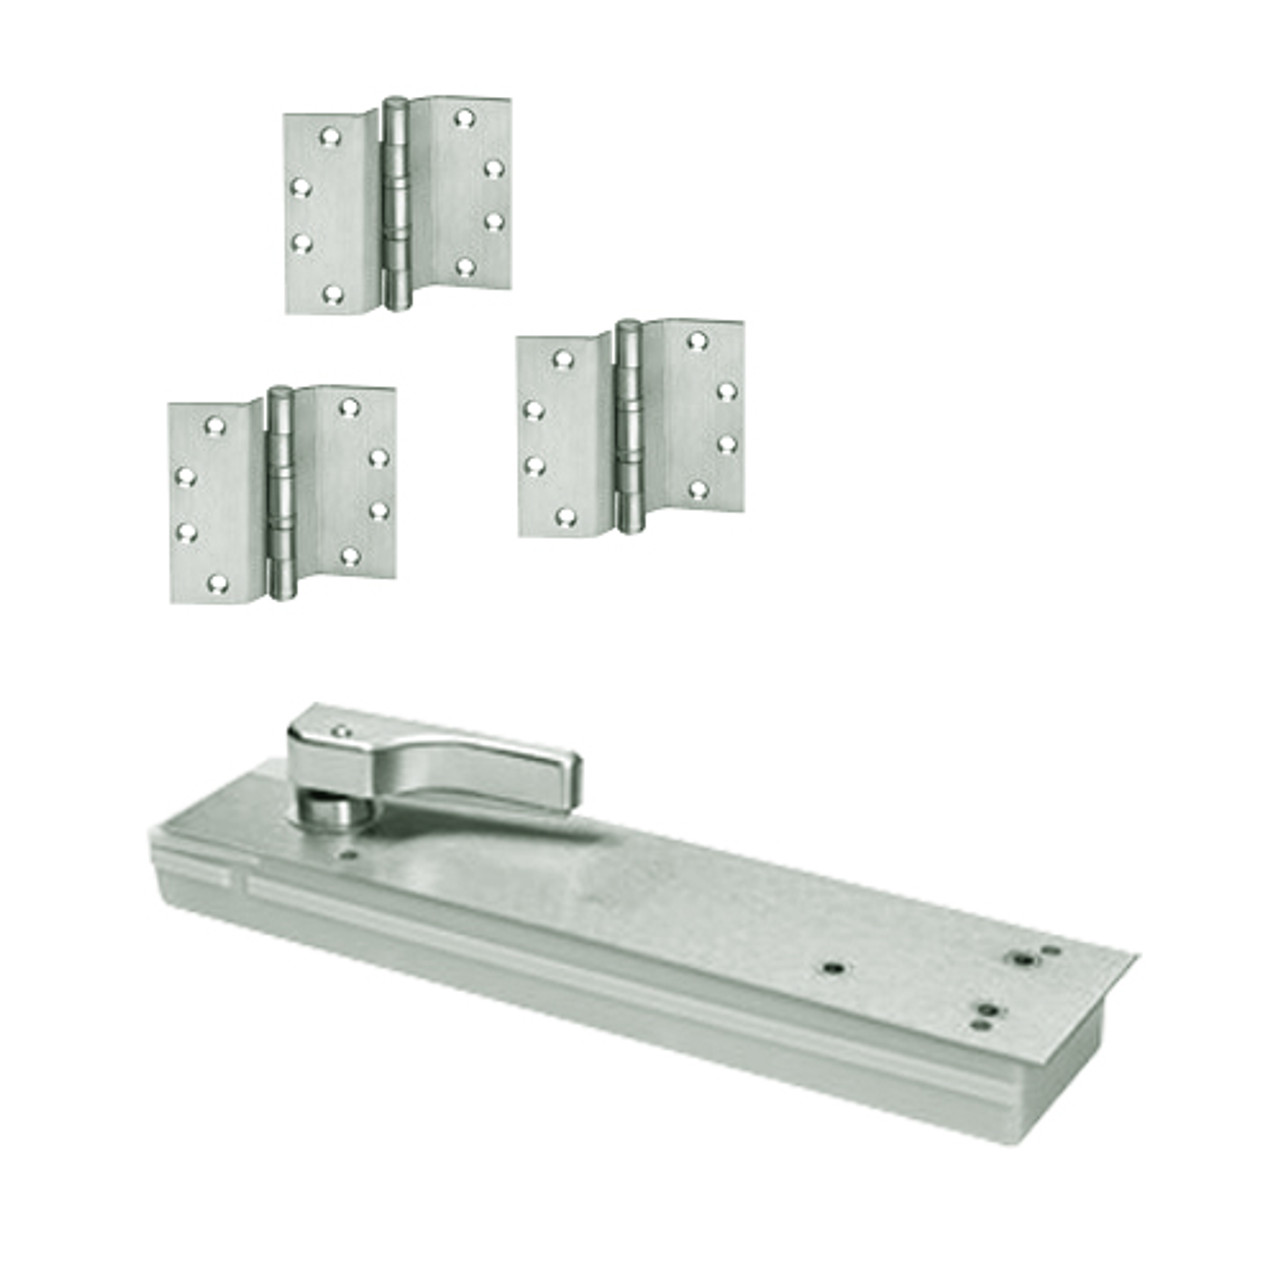 HM5103ABC90-LH-618 Rixson HM51 Series 3/4" Offset Hung Shallow Depth Floor Closers in Bright Nickel Finish